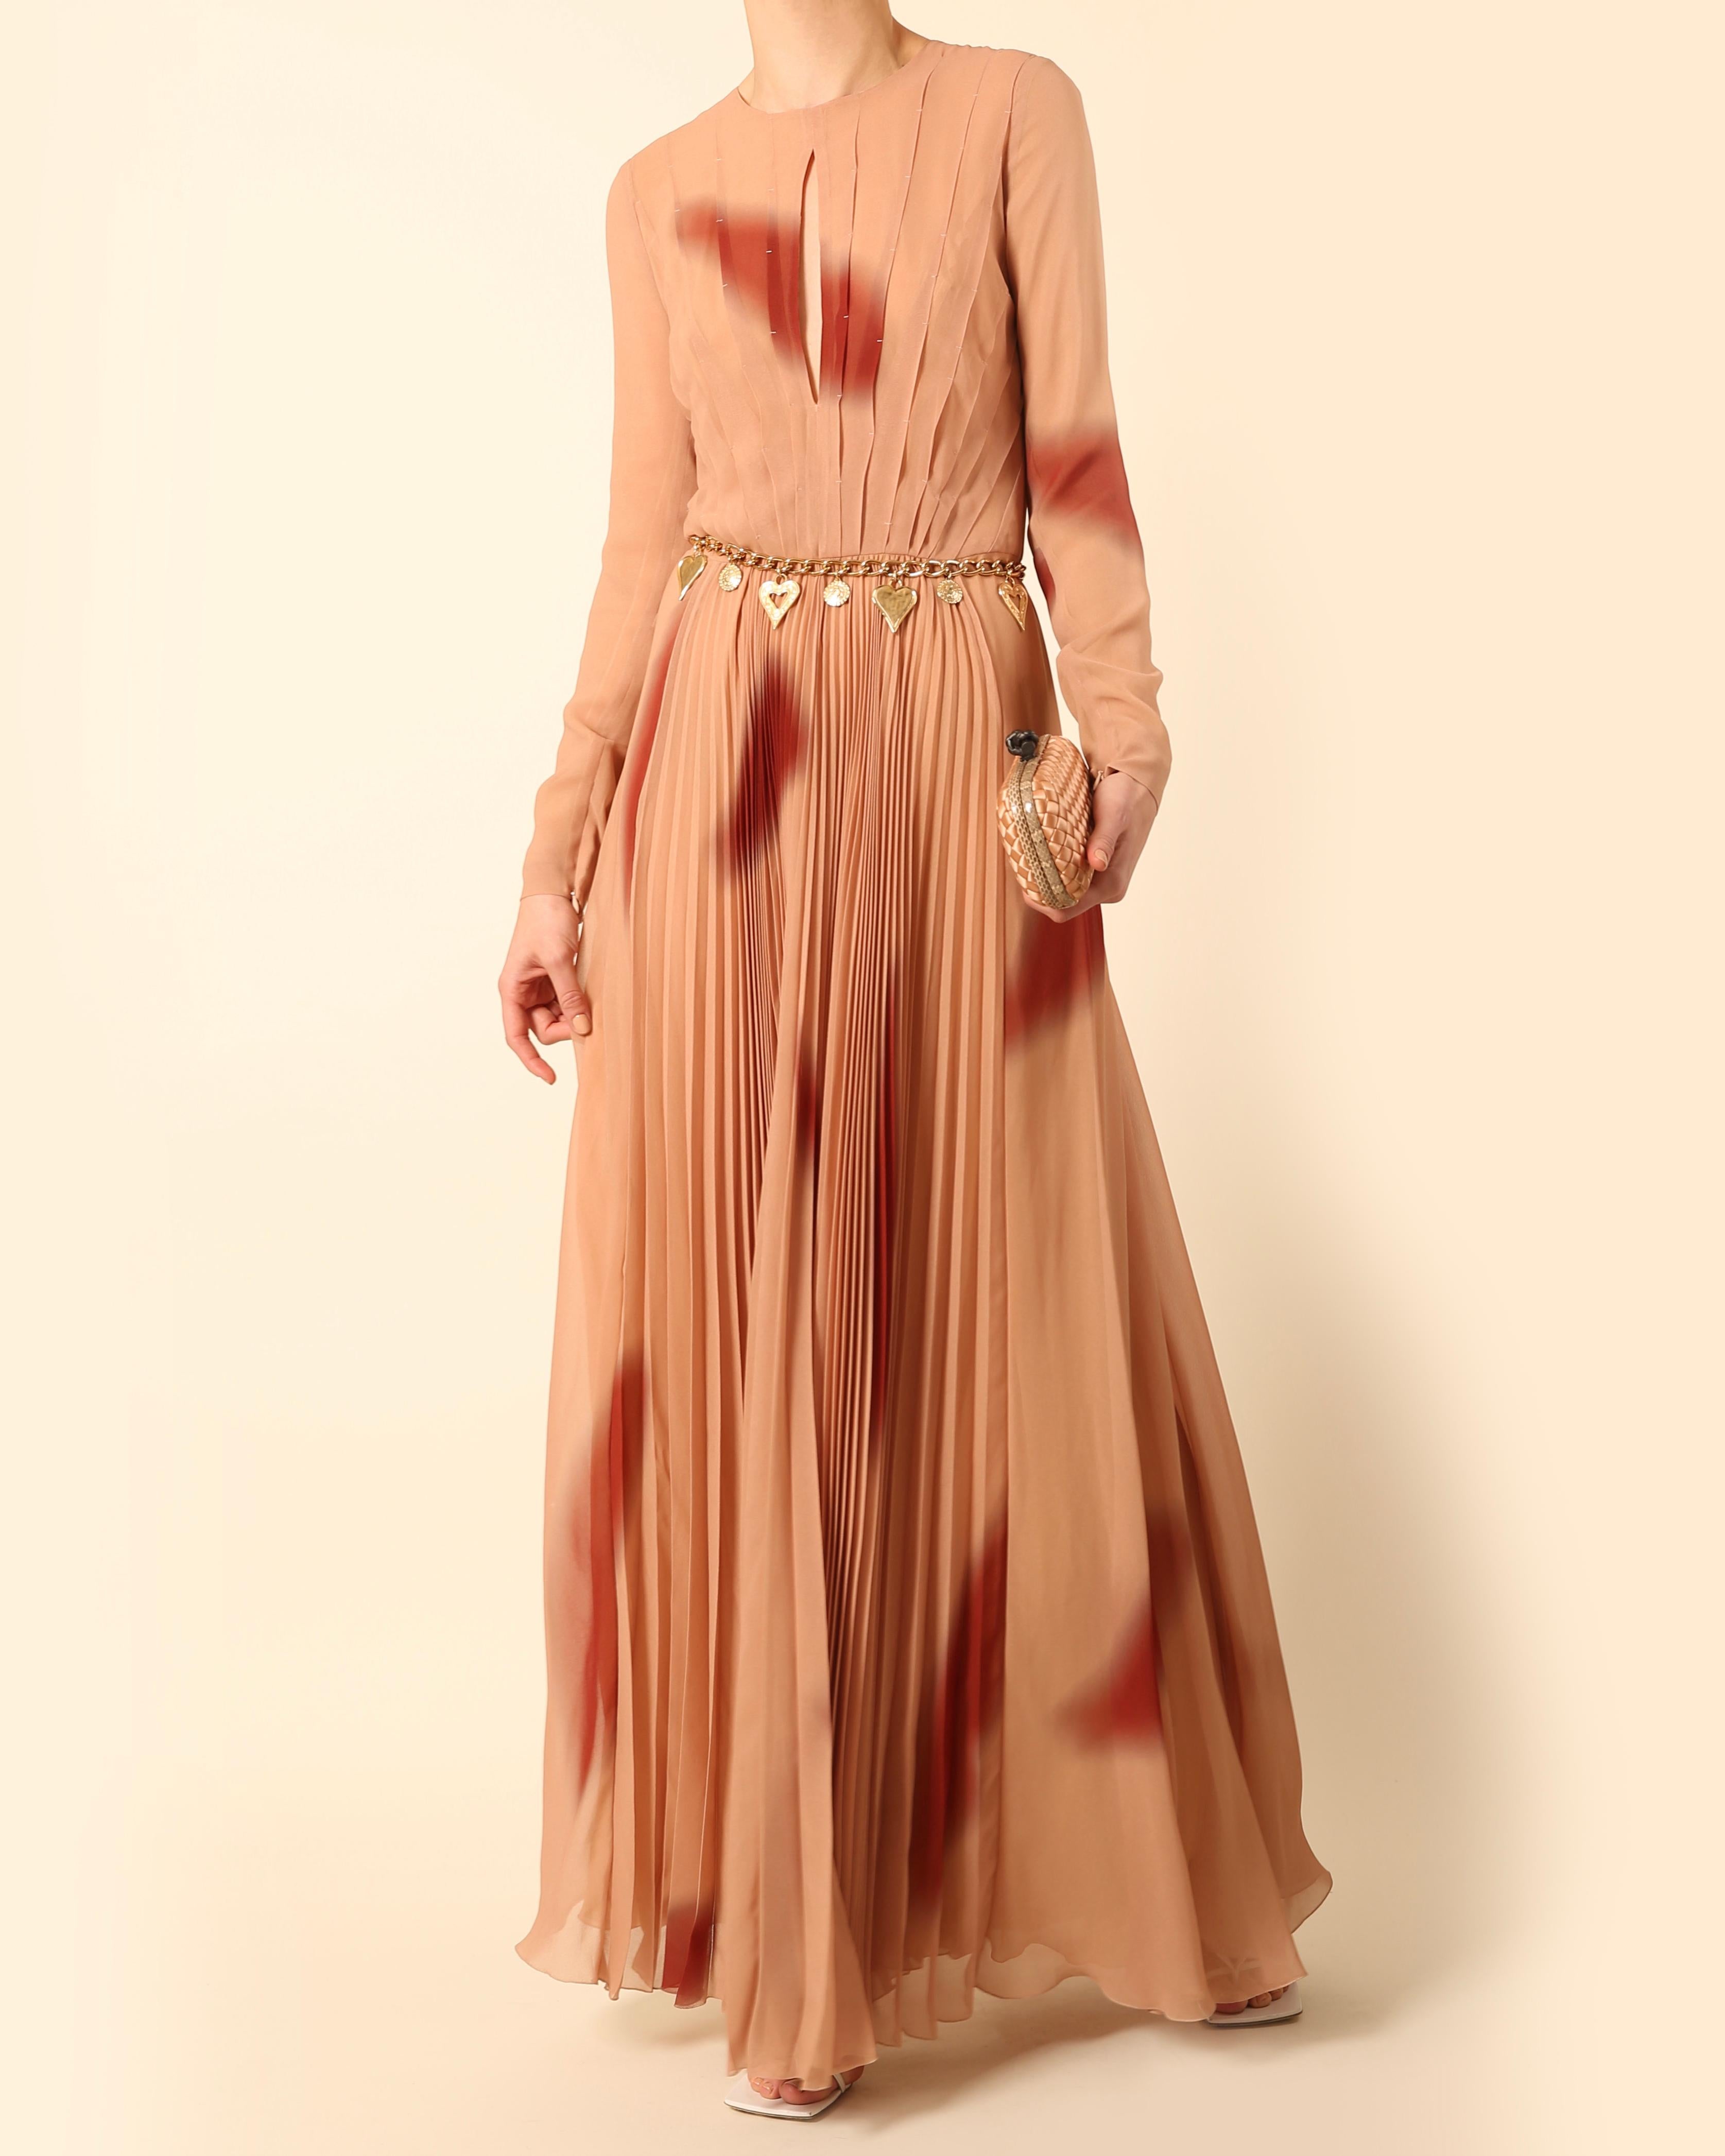 Sonia Rykiel full length gown in a beautiful shade of dusky pink with burgundy abstract print
Pleated upper with keyhole cut out neckline, long sleeves and crew neck
Plisse full double layered skirt
Cinched waist
Concealed zips to the